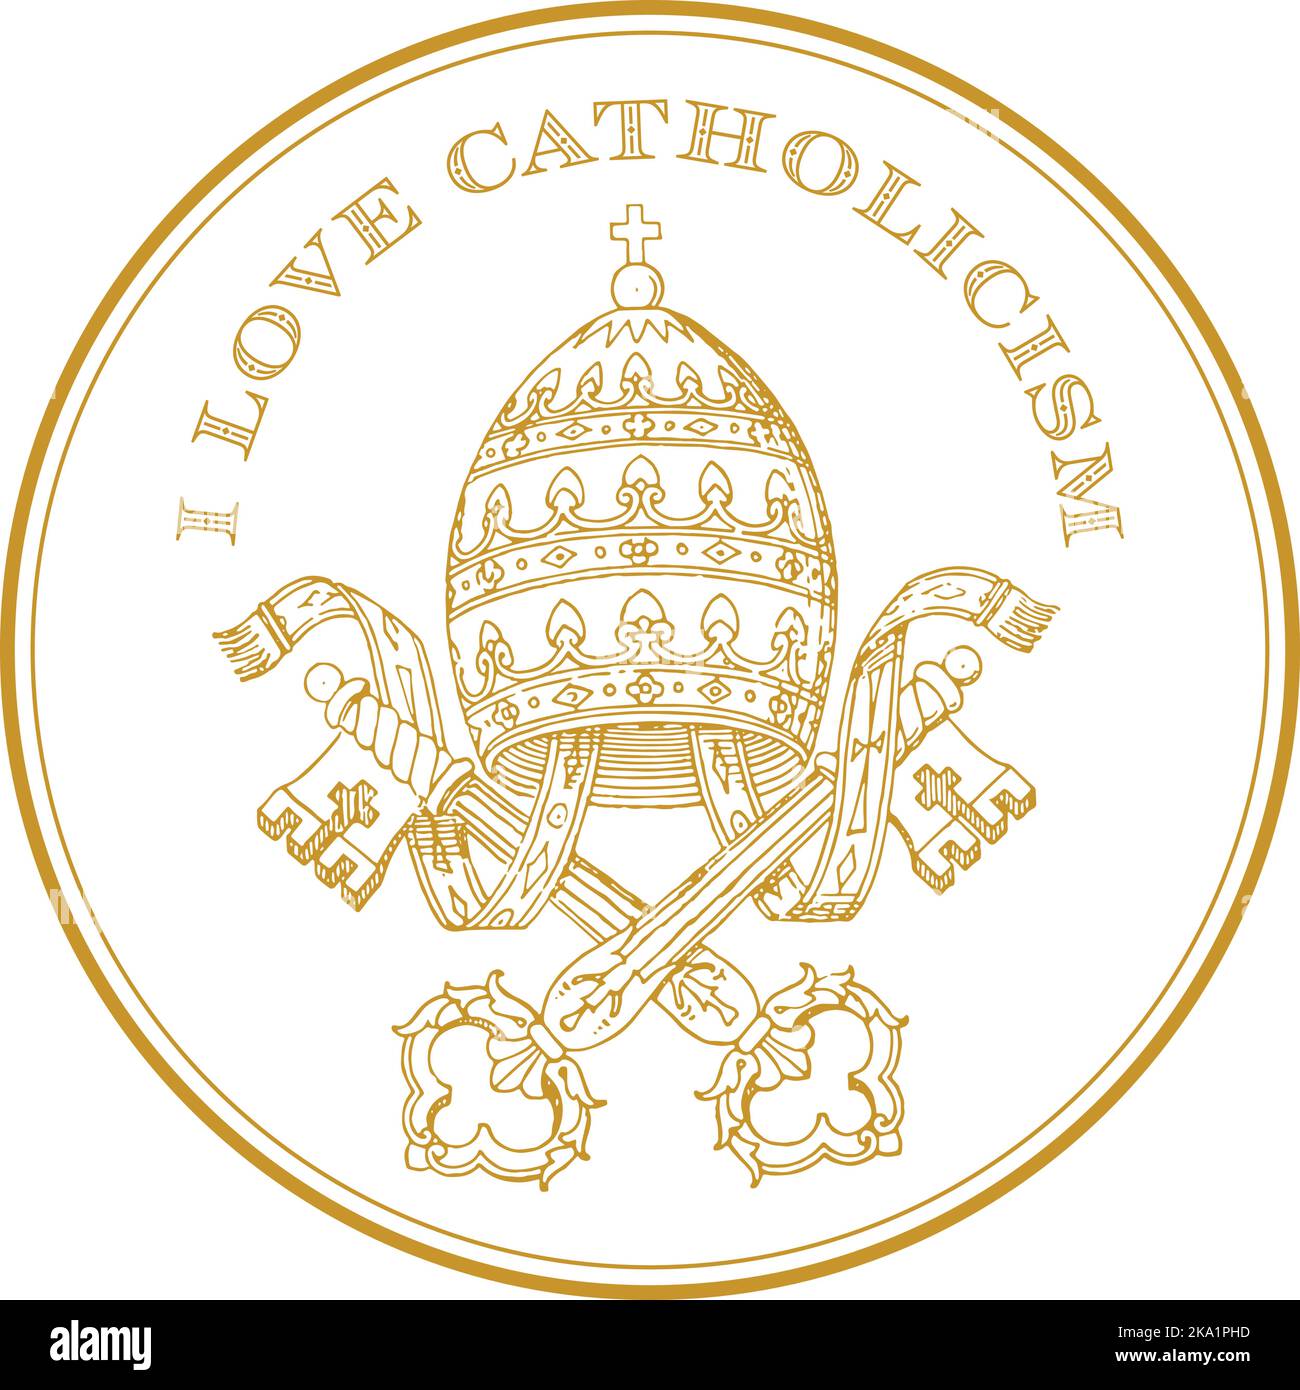 Keys of St. Peter. Coat of arms of the Catholic Church. Vatican symbol Stock Vector